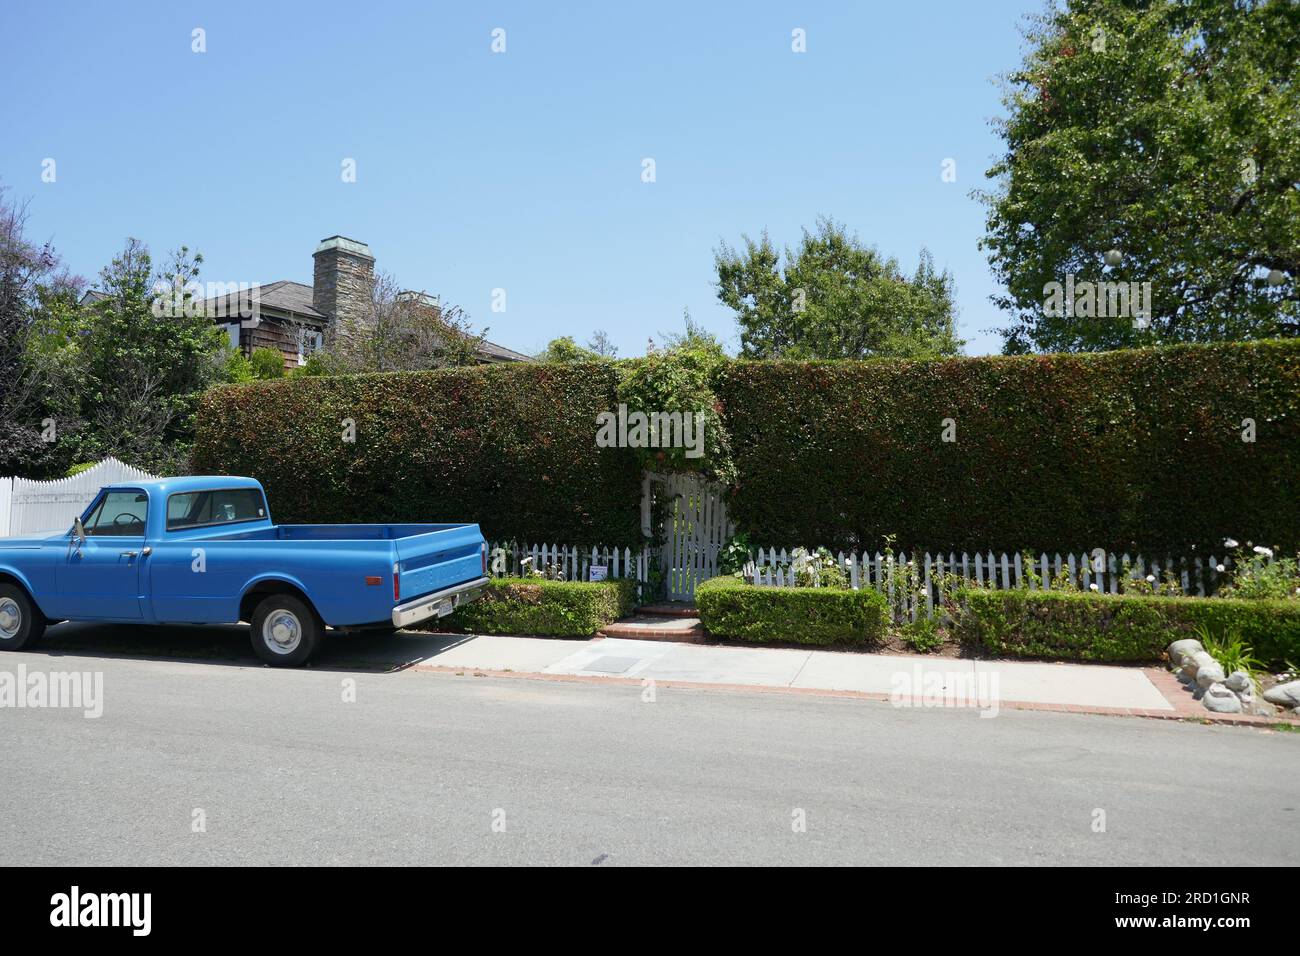 Pacific Palisades, California, USA 16th July 2023 Actor Kurt Russell and Actress Goldie Hawn Home/house on July 16, 2023 in Pacific Palisades, California, USA. Photo by Barry King/Alamy Stock Photo Stock Photo